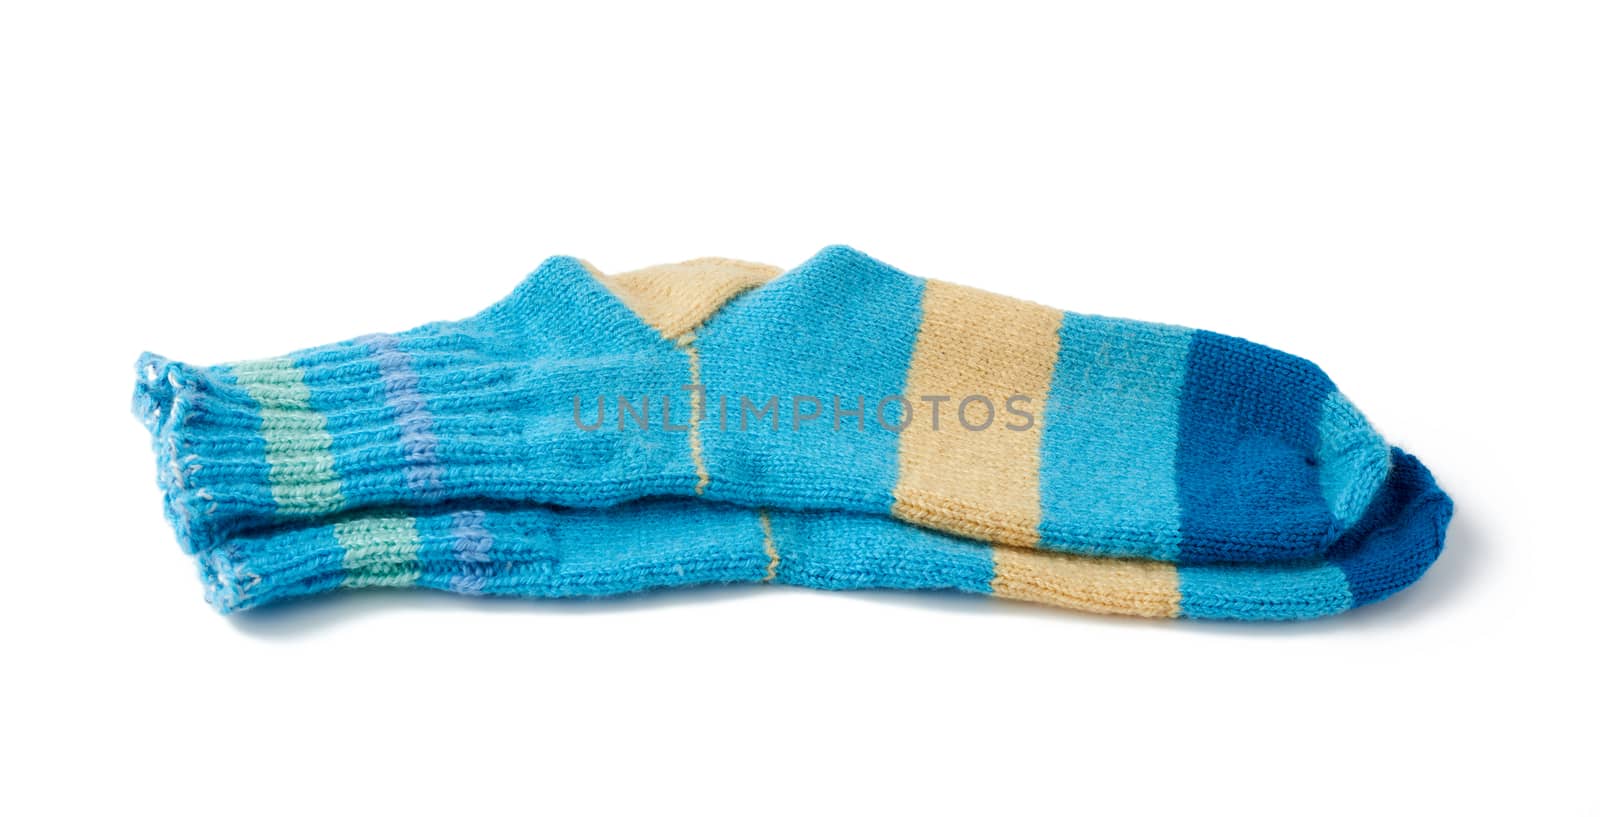 pair of striped handmade knitted warm socks made of sheep’s wool yarn, blue clothing is isolated on a white background